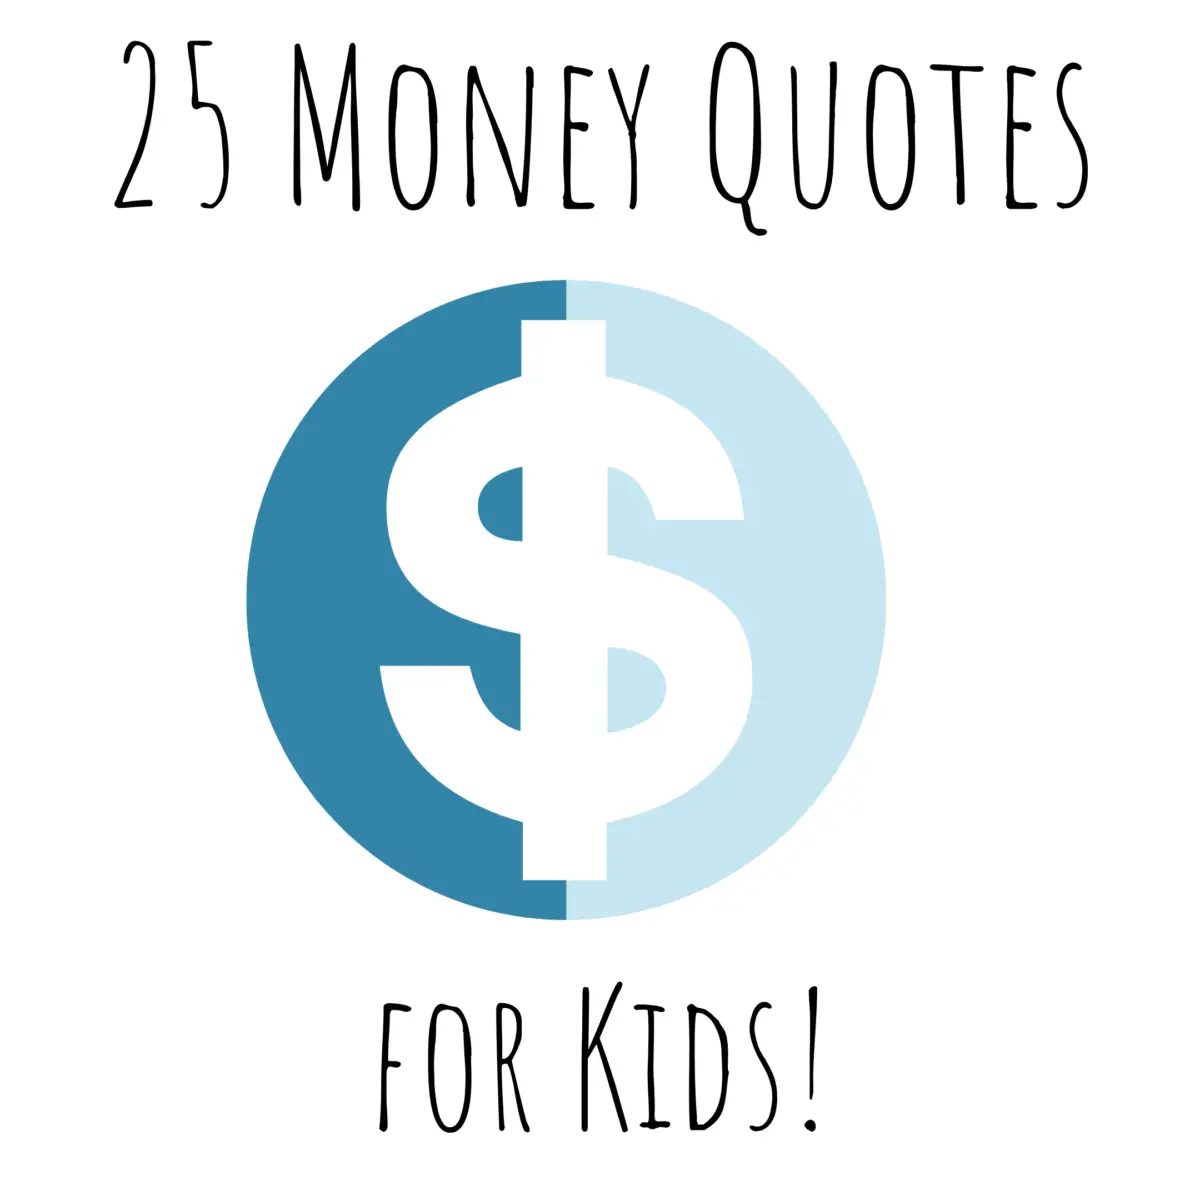 25 Money Quotes for Kids